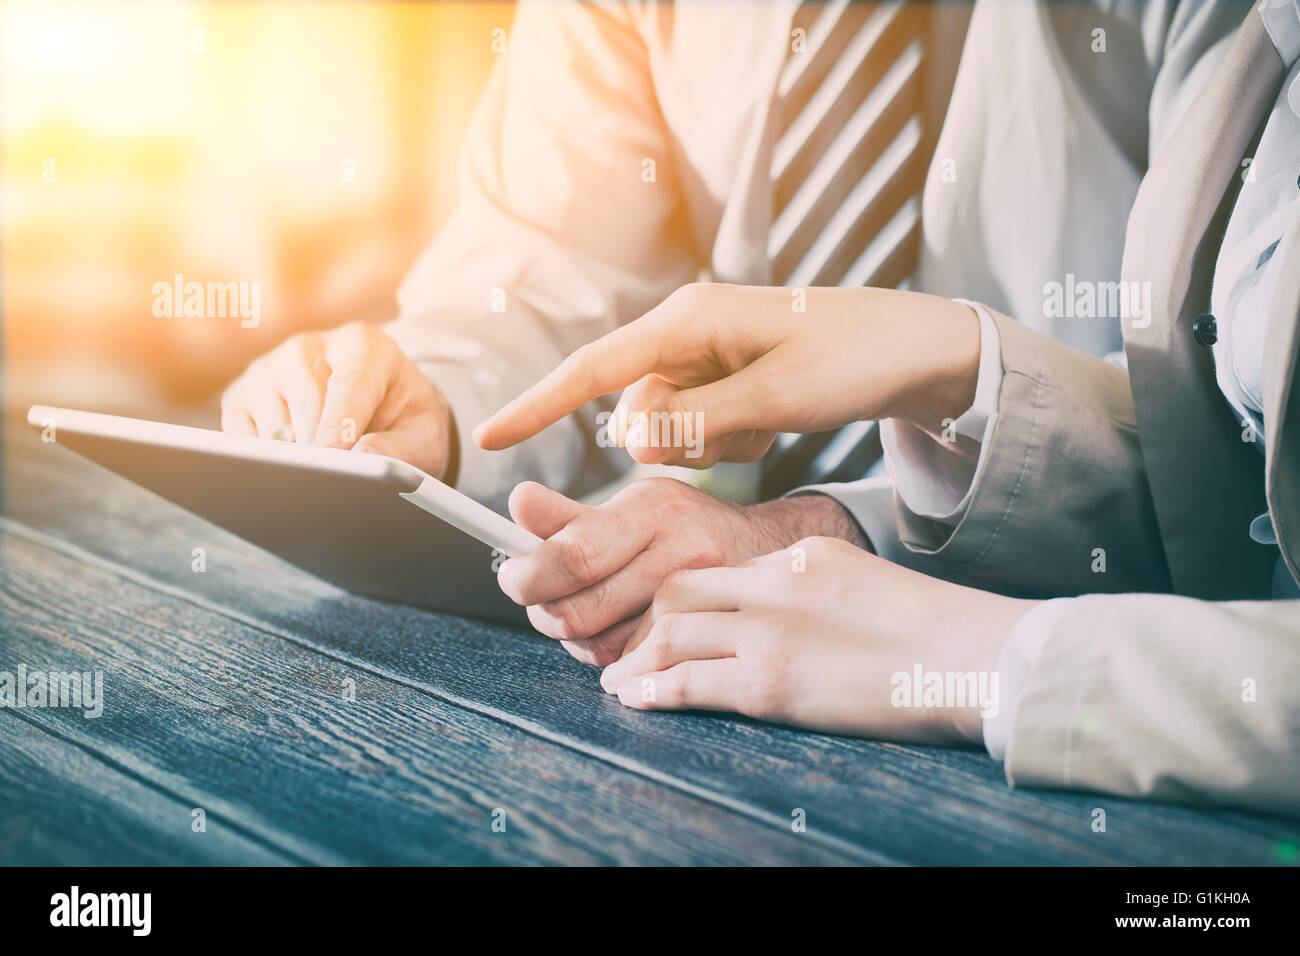 business meeting executive consulting review career report tablet - stock image Stock Photo